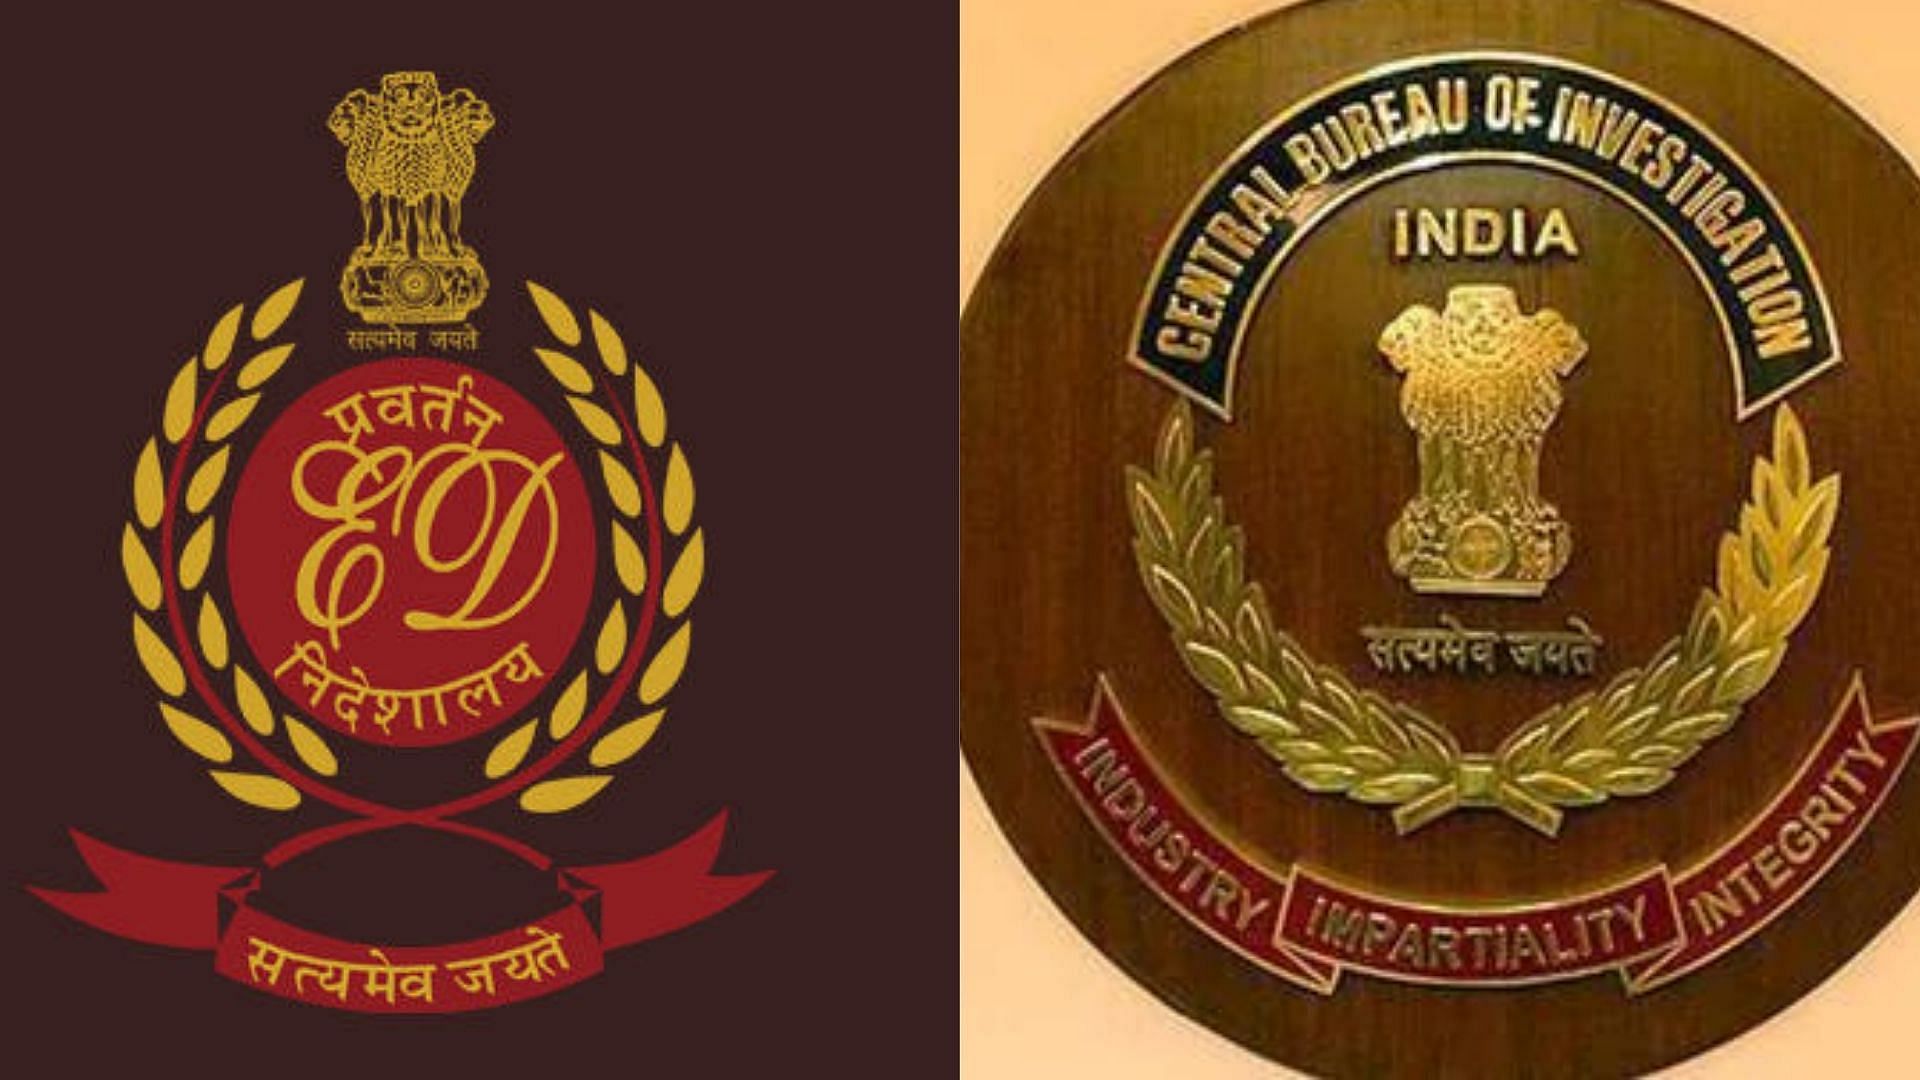 <div class="paragraphs"><p>Several bureaucratic officials have expressed their blatant disapproval of Centre's gazette <a href="https://www.thequint.com/news/india/centre-extends-tenure-of-defence-home-secretaries-ib-raw-chiefs-by-two-years#read-more">notification</a> on extending the tenure of Defence Secretary, Home Secretary, Director of Intelligence Bureau, Secretary of Research and Analysis Wing for a period of two years.</p></div>